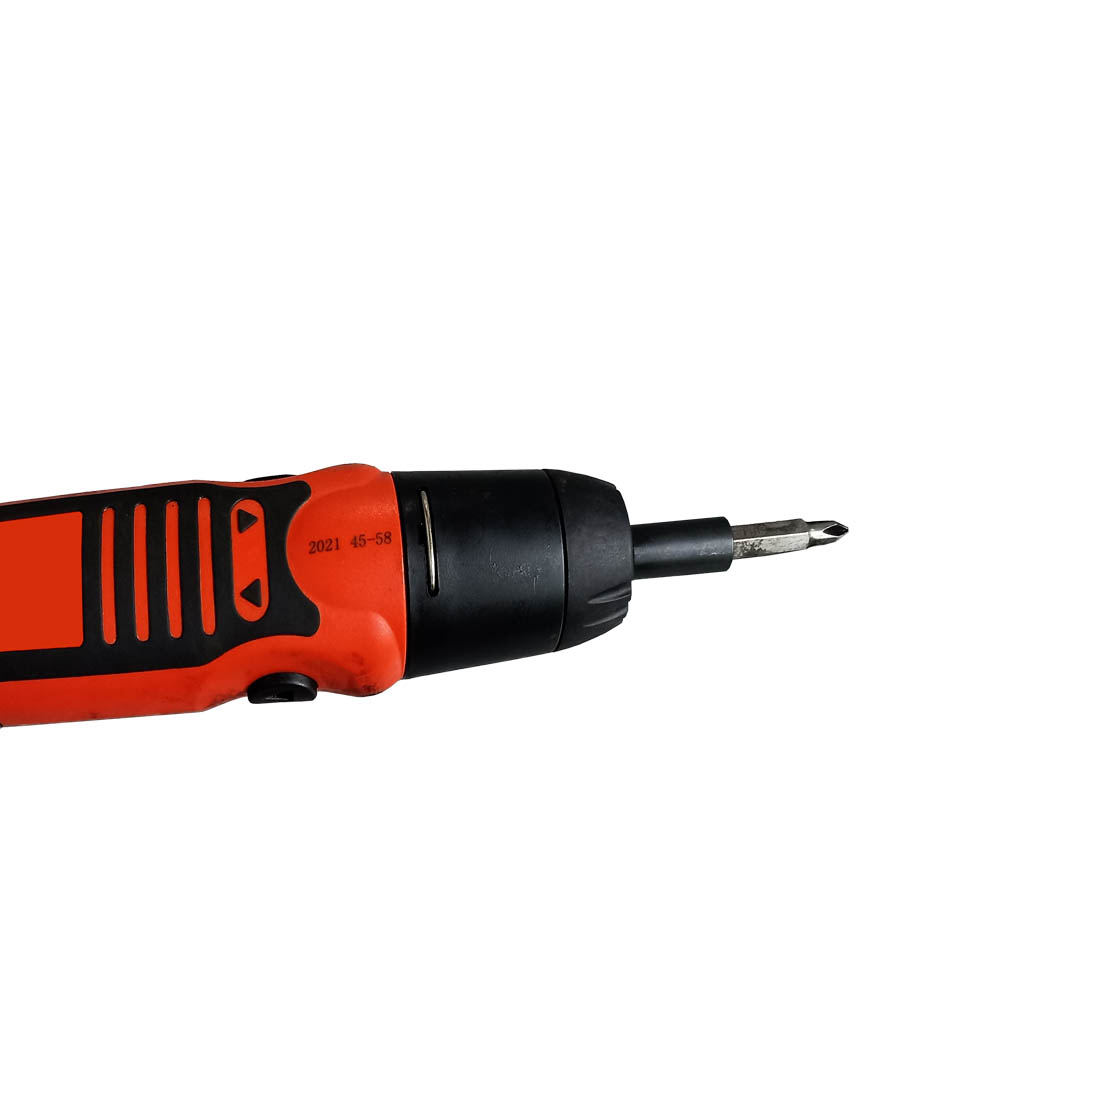 battery powered screw driver cover image.